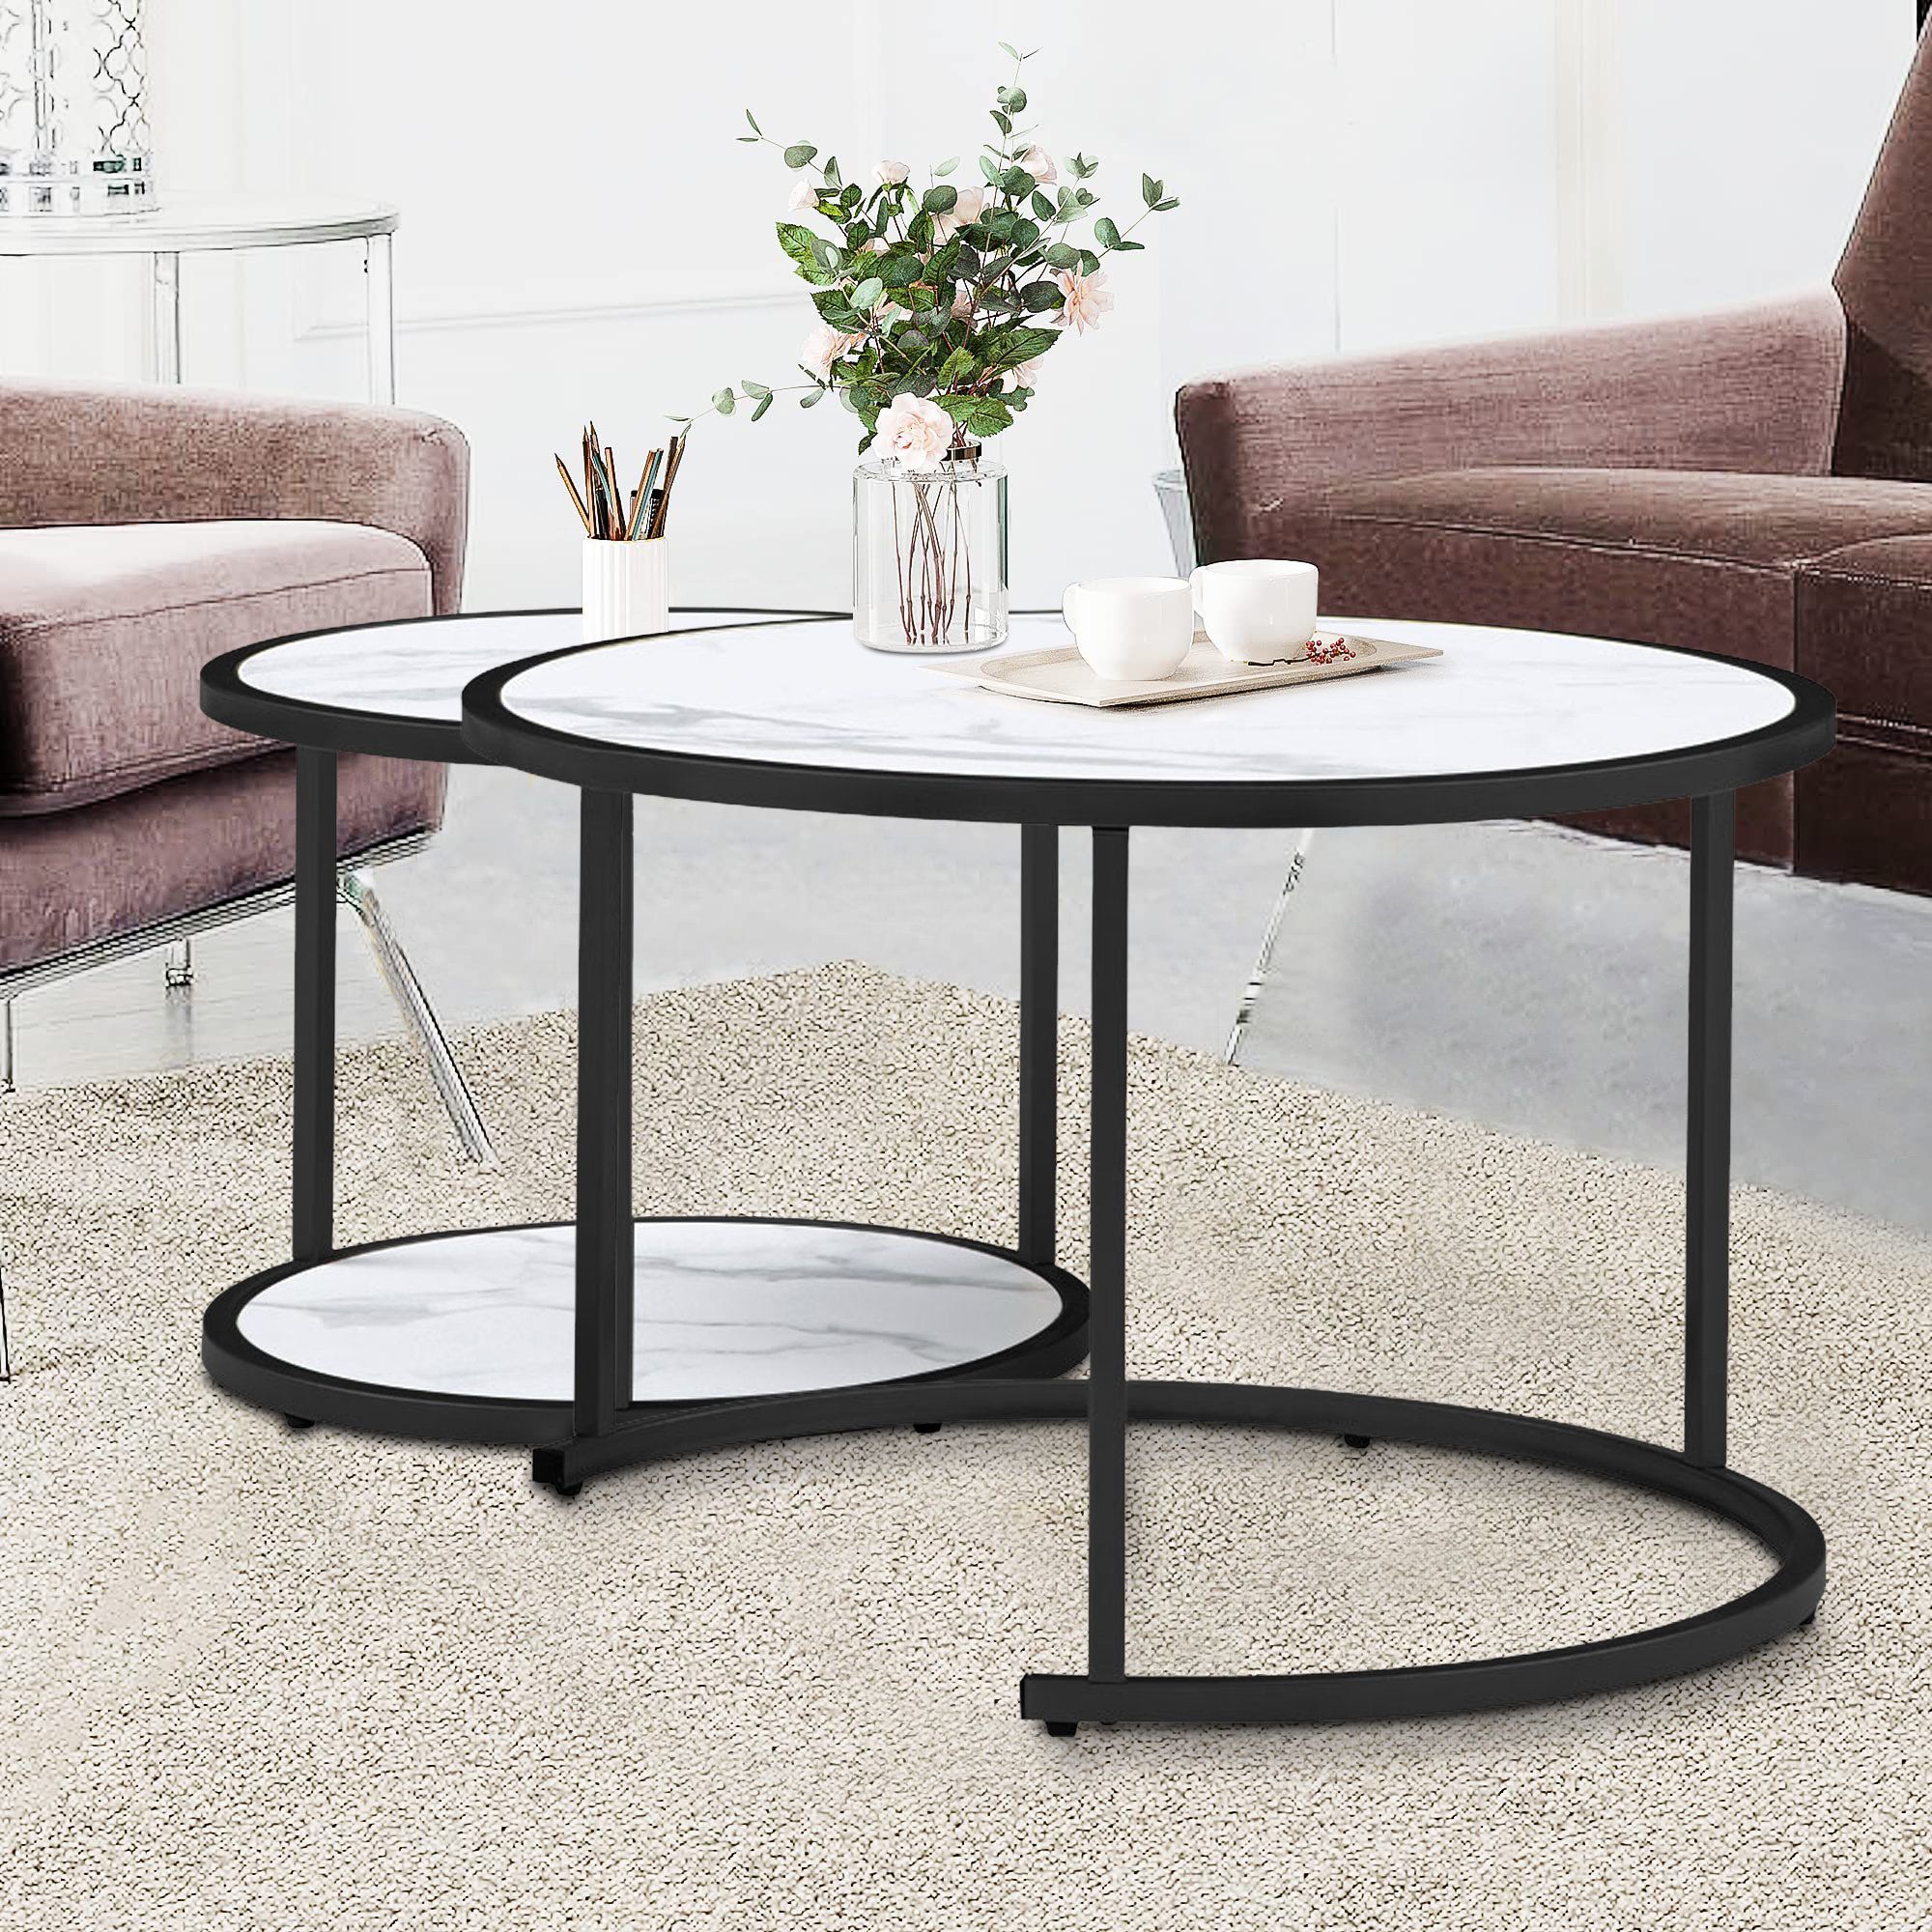 Everly Quinn 2 Pieces Modern Nesting Coffee Table, Round Wood Accent, Faux  Marble Mdf Top | Wayfair Intended For Modern Nesting Coffee Tables (View 11 of 15)